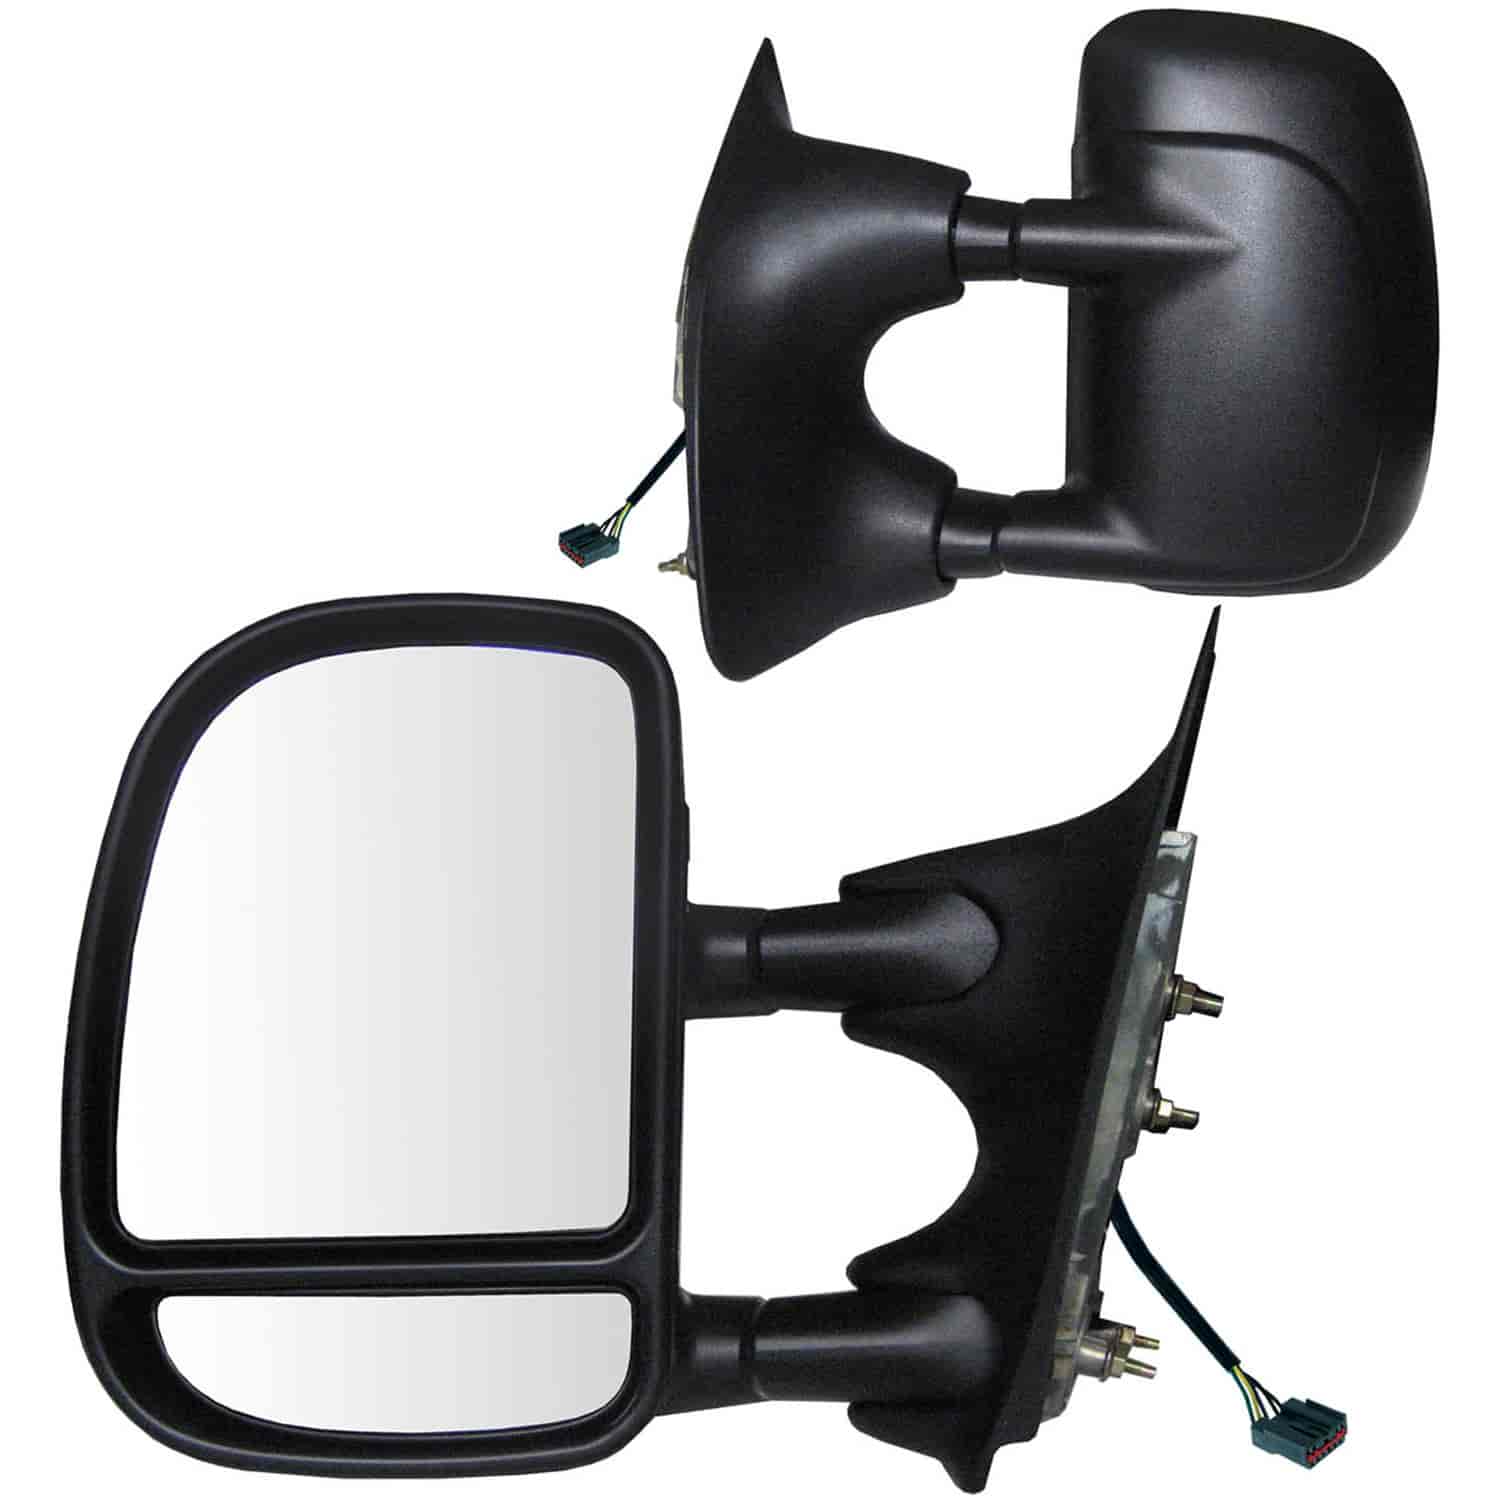 OEM Style Replacement mirror set for 01-07 Ford F250/ F350/ F450/ F550 Super Duty Pick-Up 00-05 Ford